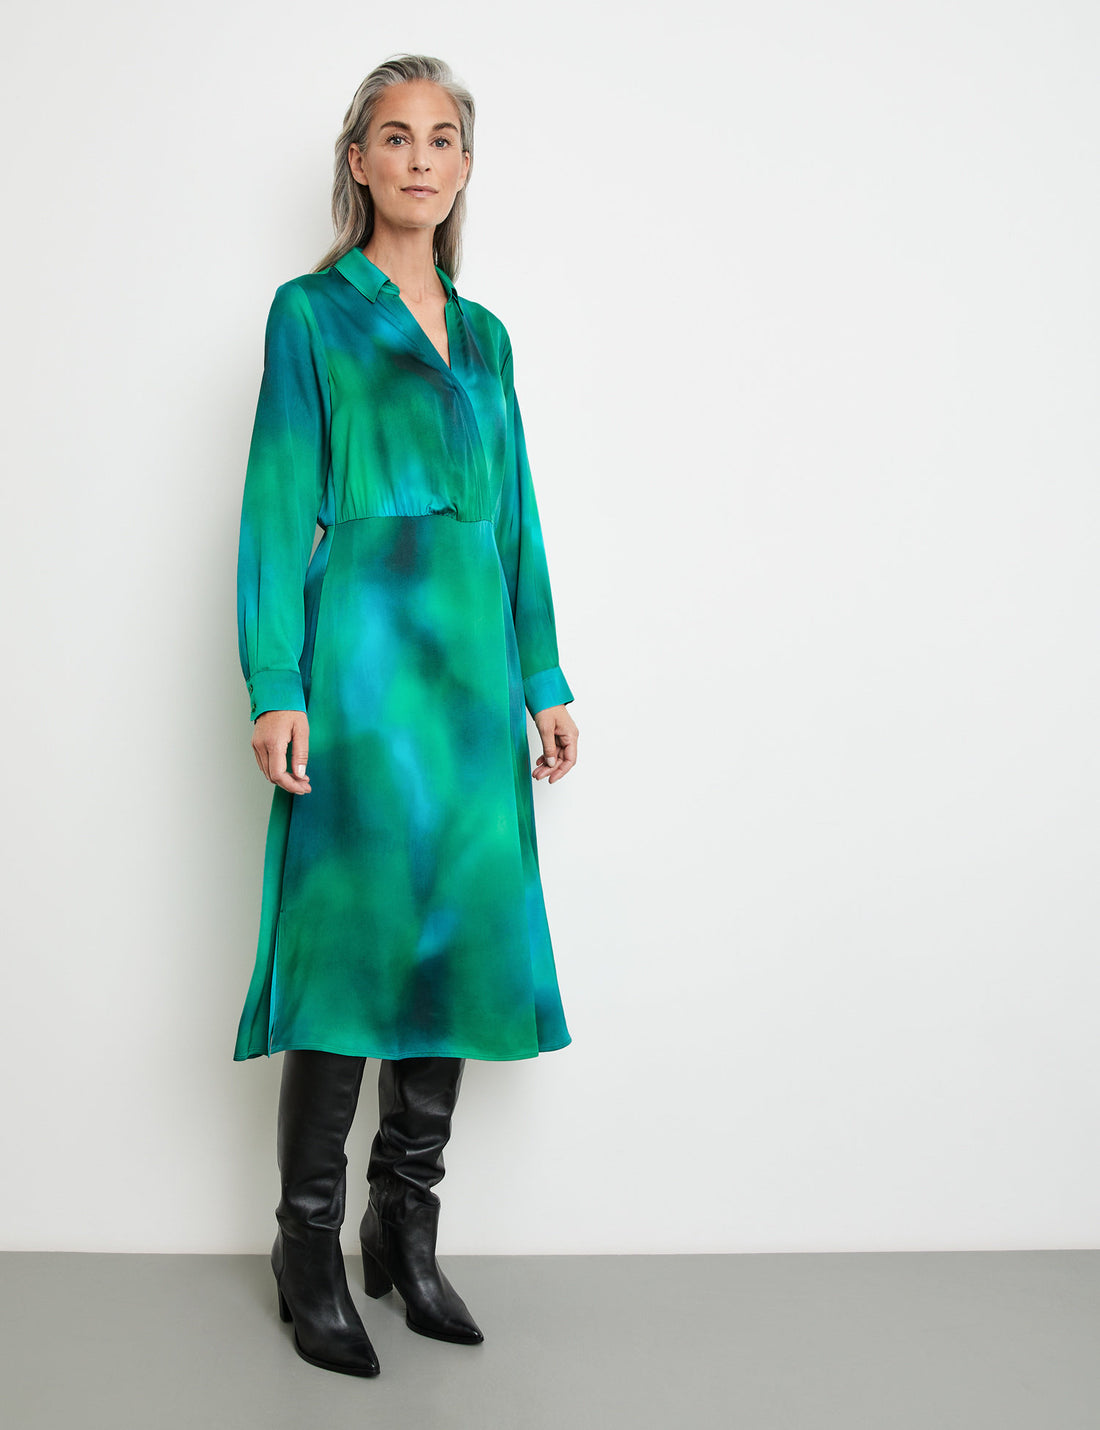 Patterned Dress With A Collar And Side Slits_280029-31429_5058_01